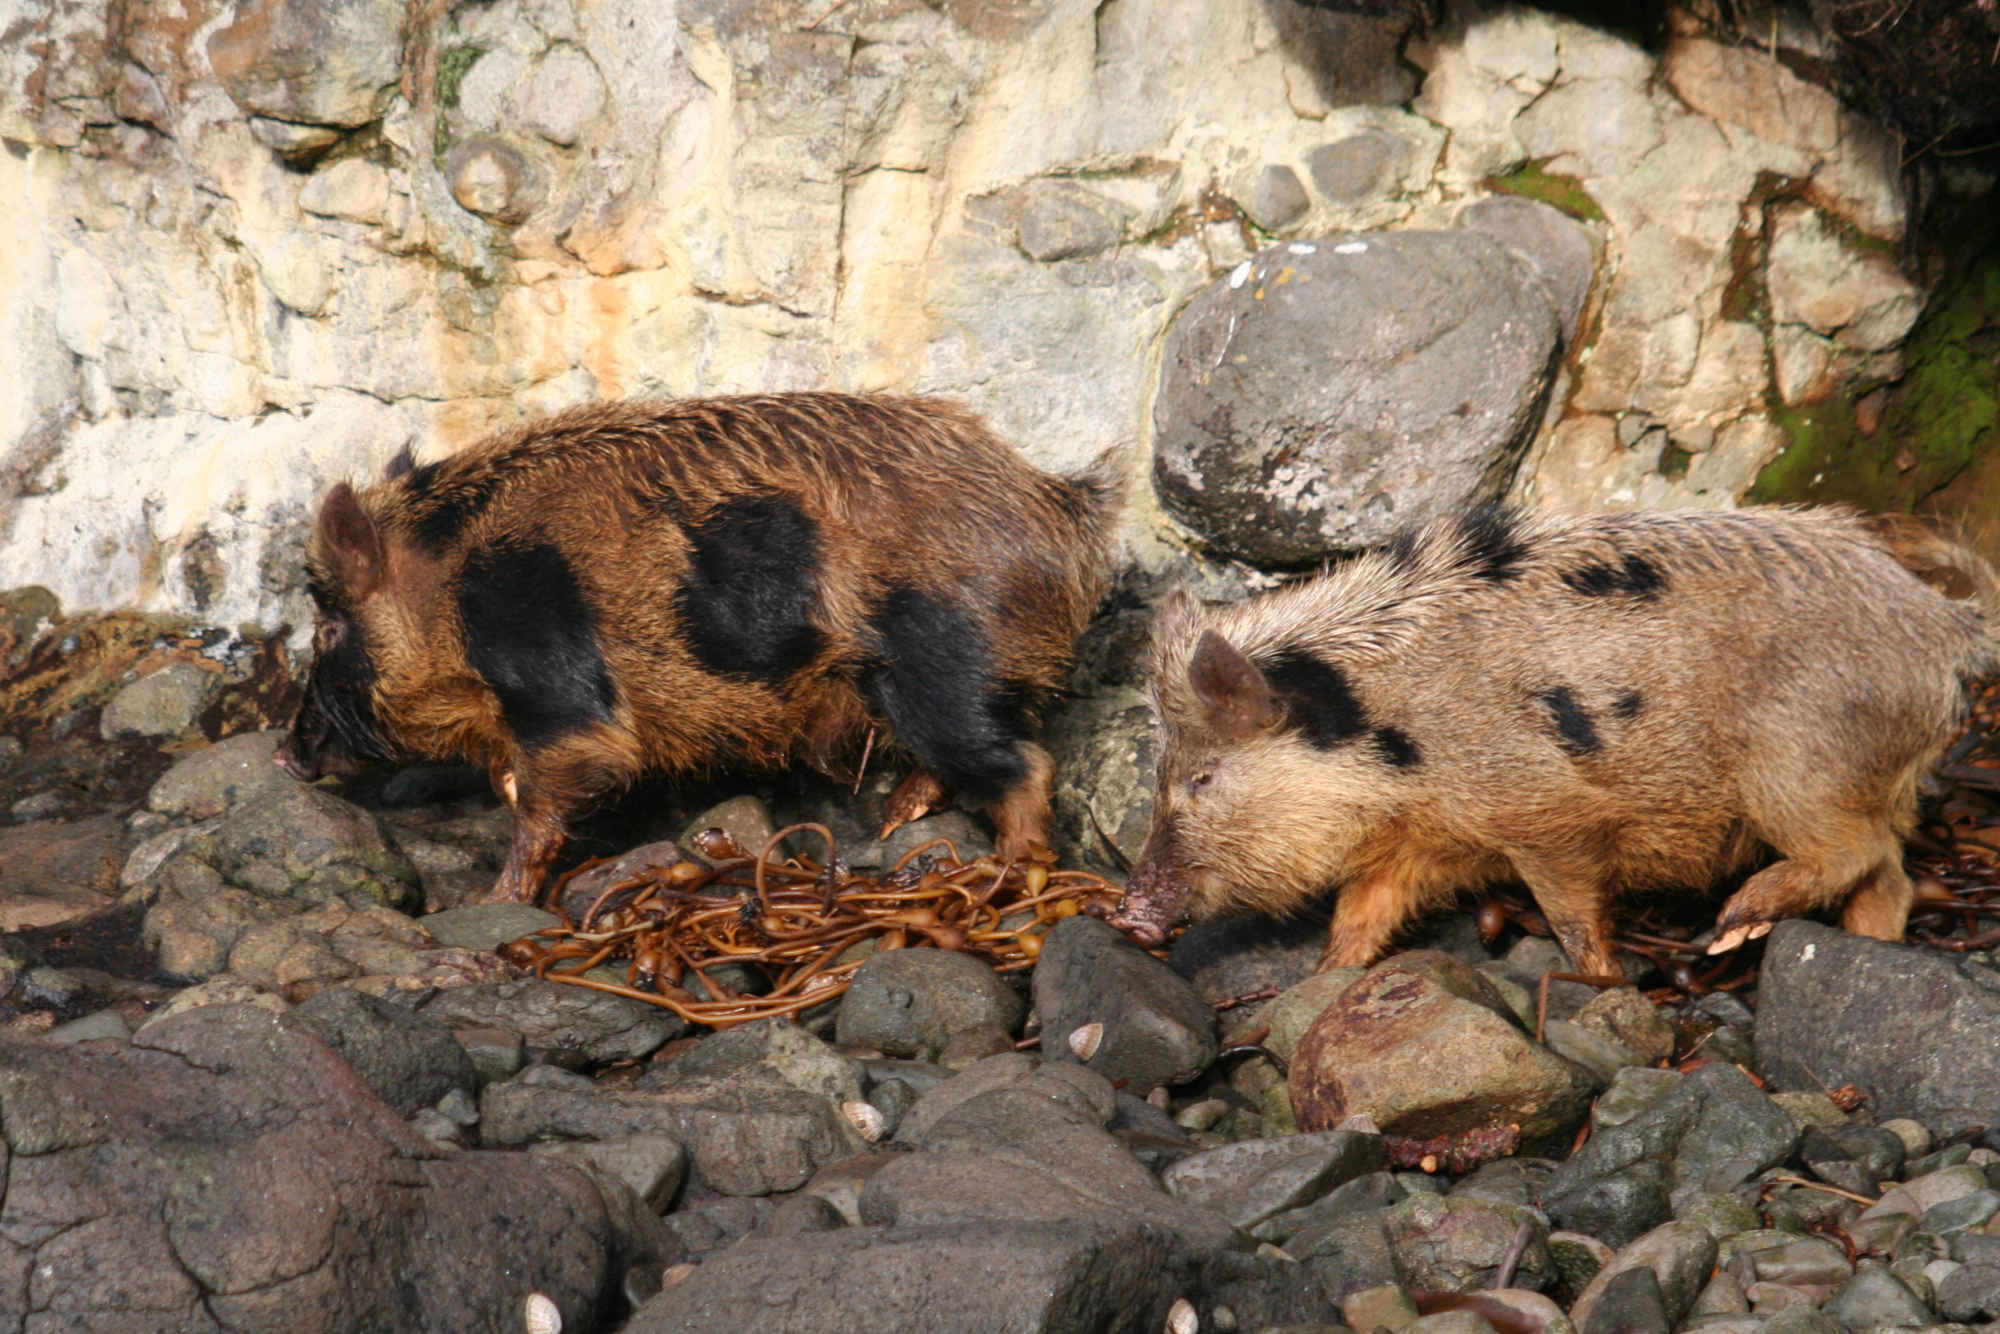 Auckland Island pigs scour the coastline for food. Due to their smaller stature compared to other breeds, the pigs are better candidates for xenotransplantation. 